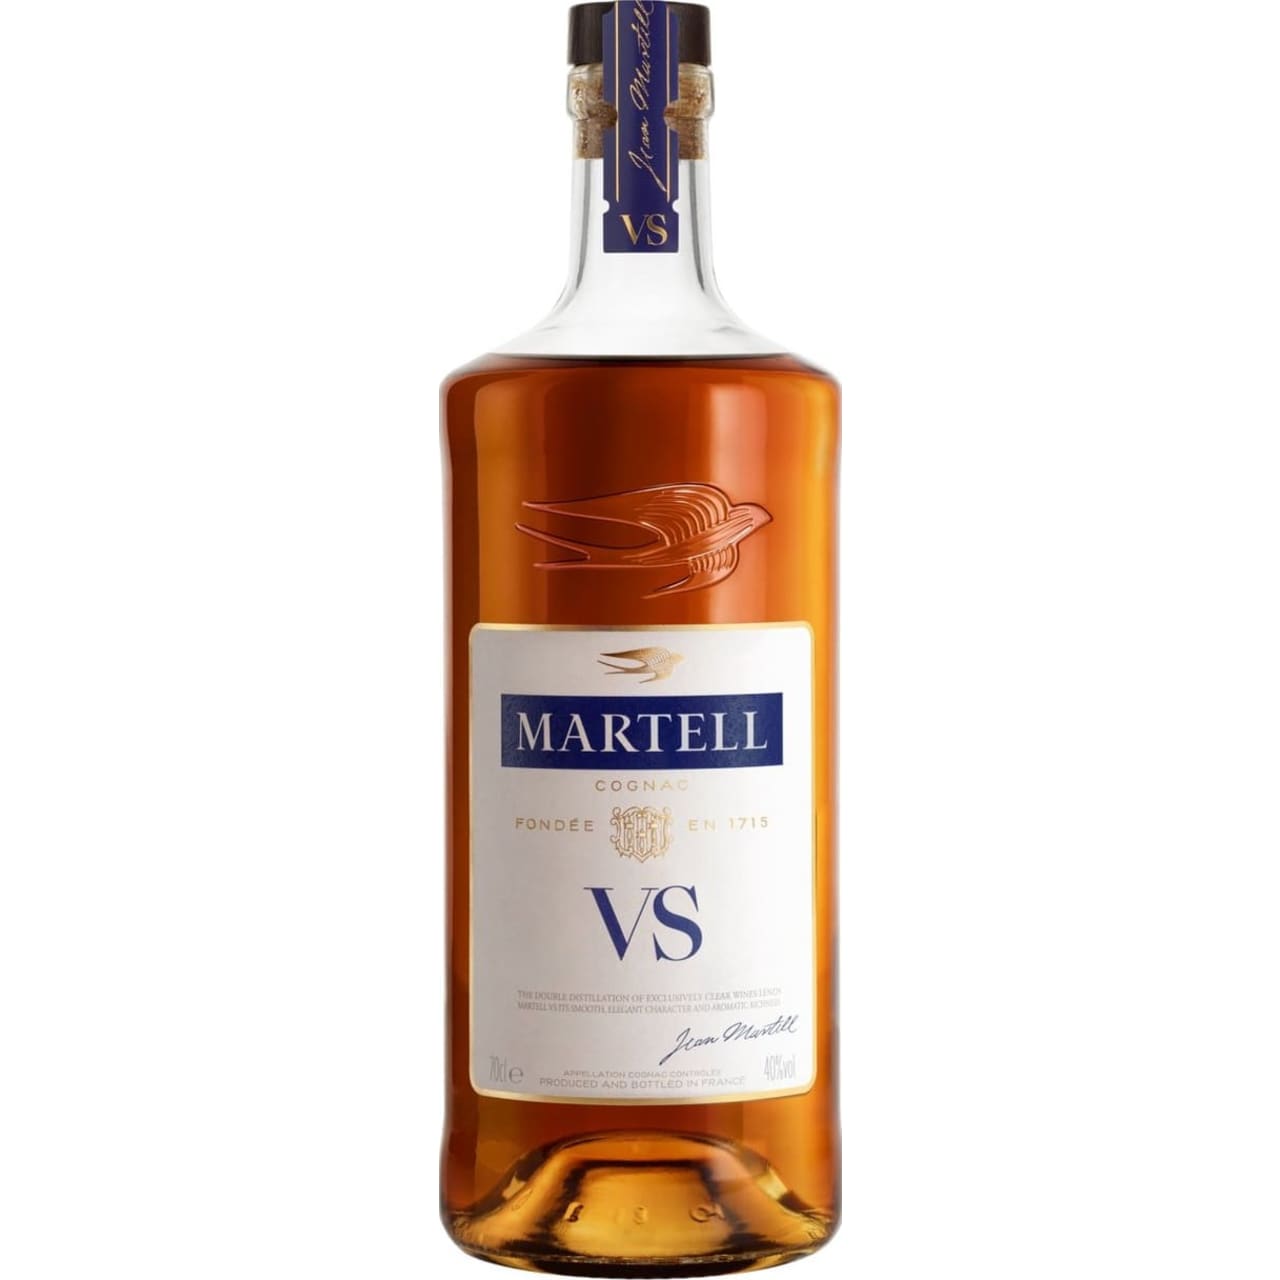 Martell's 'Very Special' cognac was created in the middle of the 19th century and is one of the most recognisable bottles in the world.